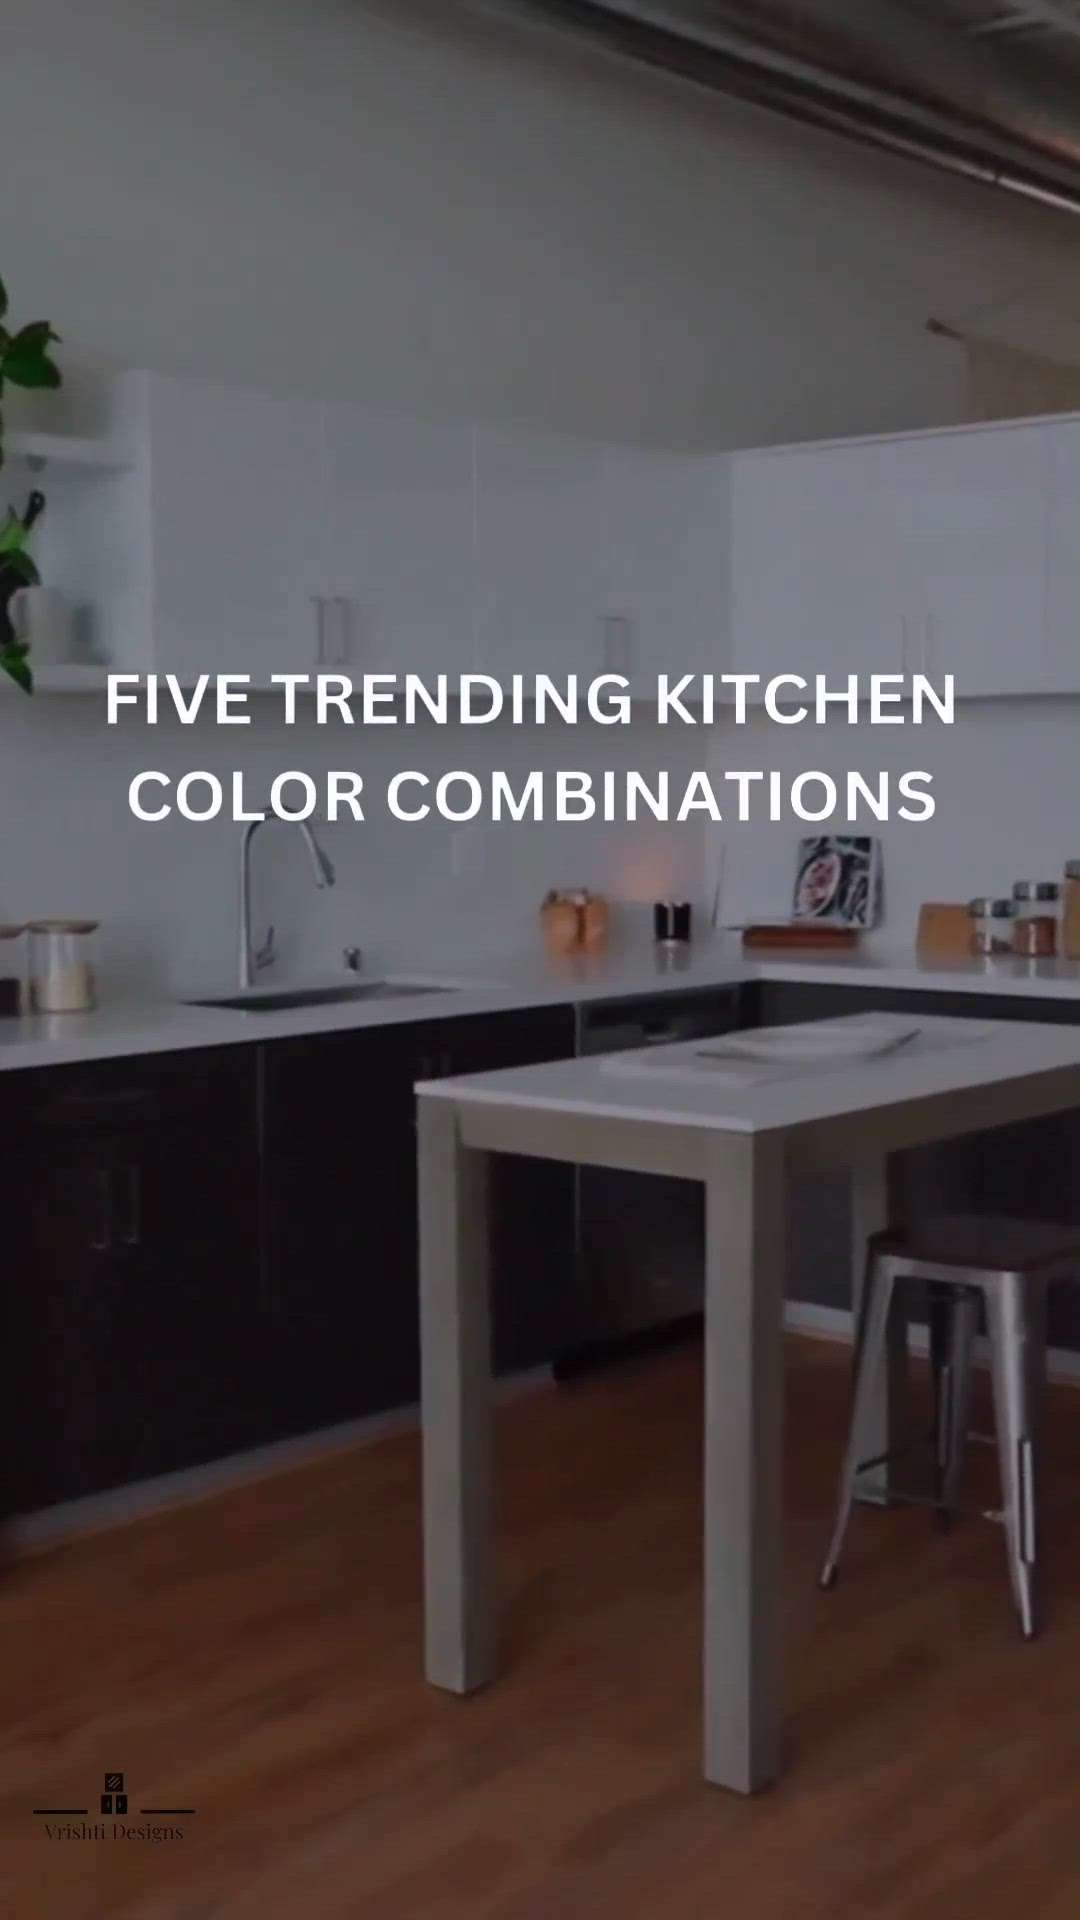 Elevate Your Kitchen's Aesthetic with These Five Trending Color Combinations! ✨🔝 From modern and sleek to warm and inviting, we've curated a collection of stunning kitchen color palettes that will bring life to your culinary haven. Get ready to unleash your inner chef and create a space that's as beautiful as it is functional. Which color combination speaks to your style? Share your thoughts in the comments! 👇🍳 
#KitchenInspo #ColorfulKitchens #InteriorDesignGoals #KitchenPalette #KitchenColorCombinations #InteriorDesignInspo #KitchenMakeover #HomeDecorIdeas #VrishtiDesigns